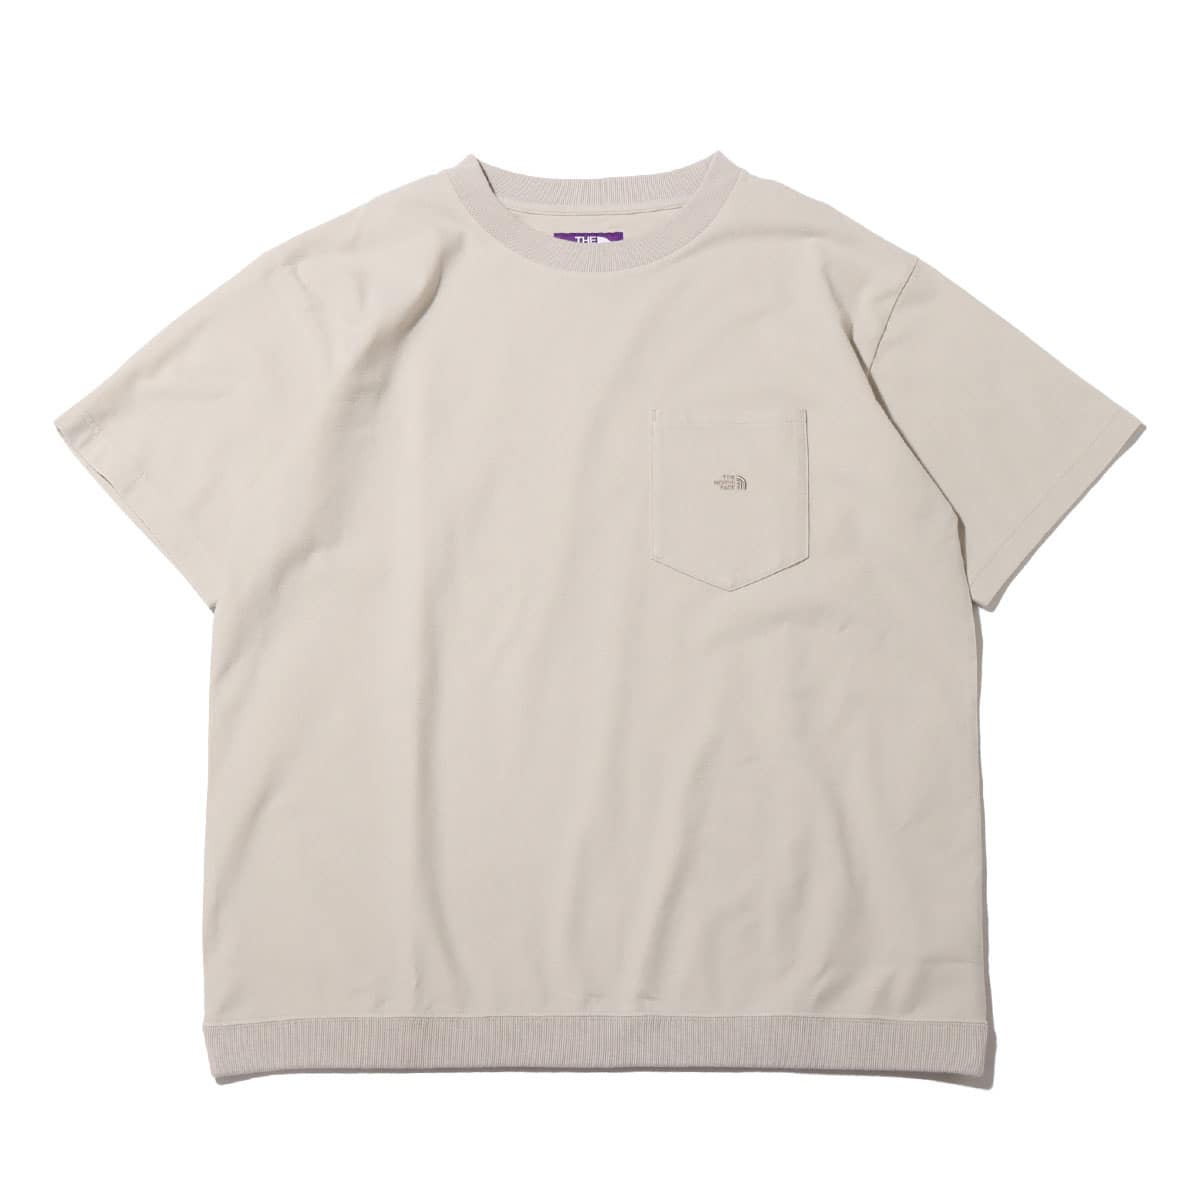 THE NORTH FACE PURPLE LABEL High Bulky H/S Pocket Tee Light Gray